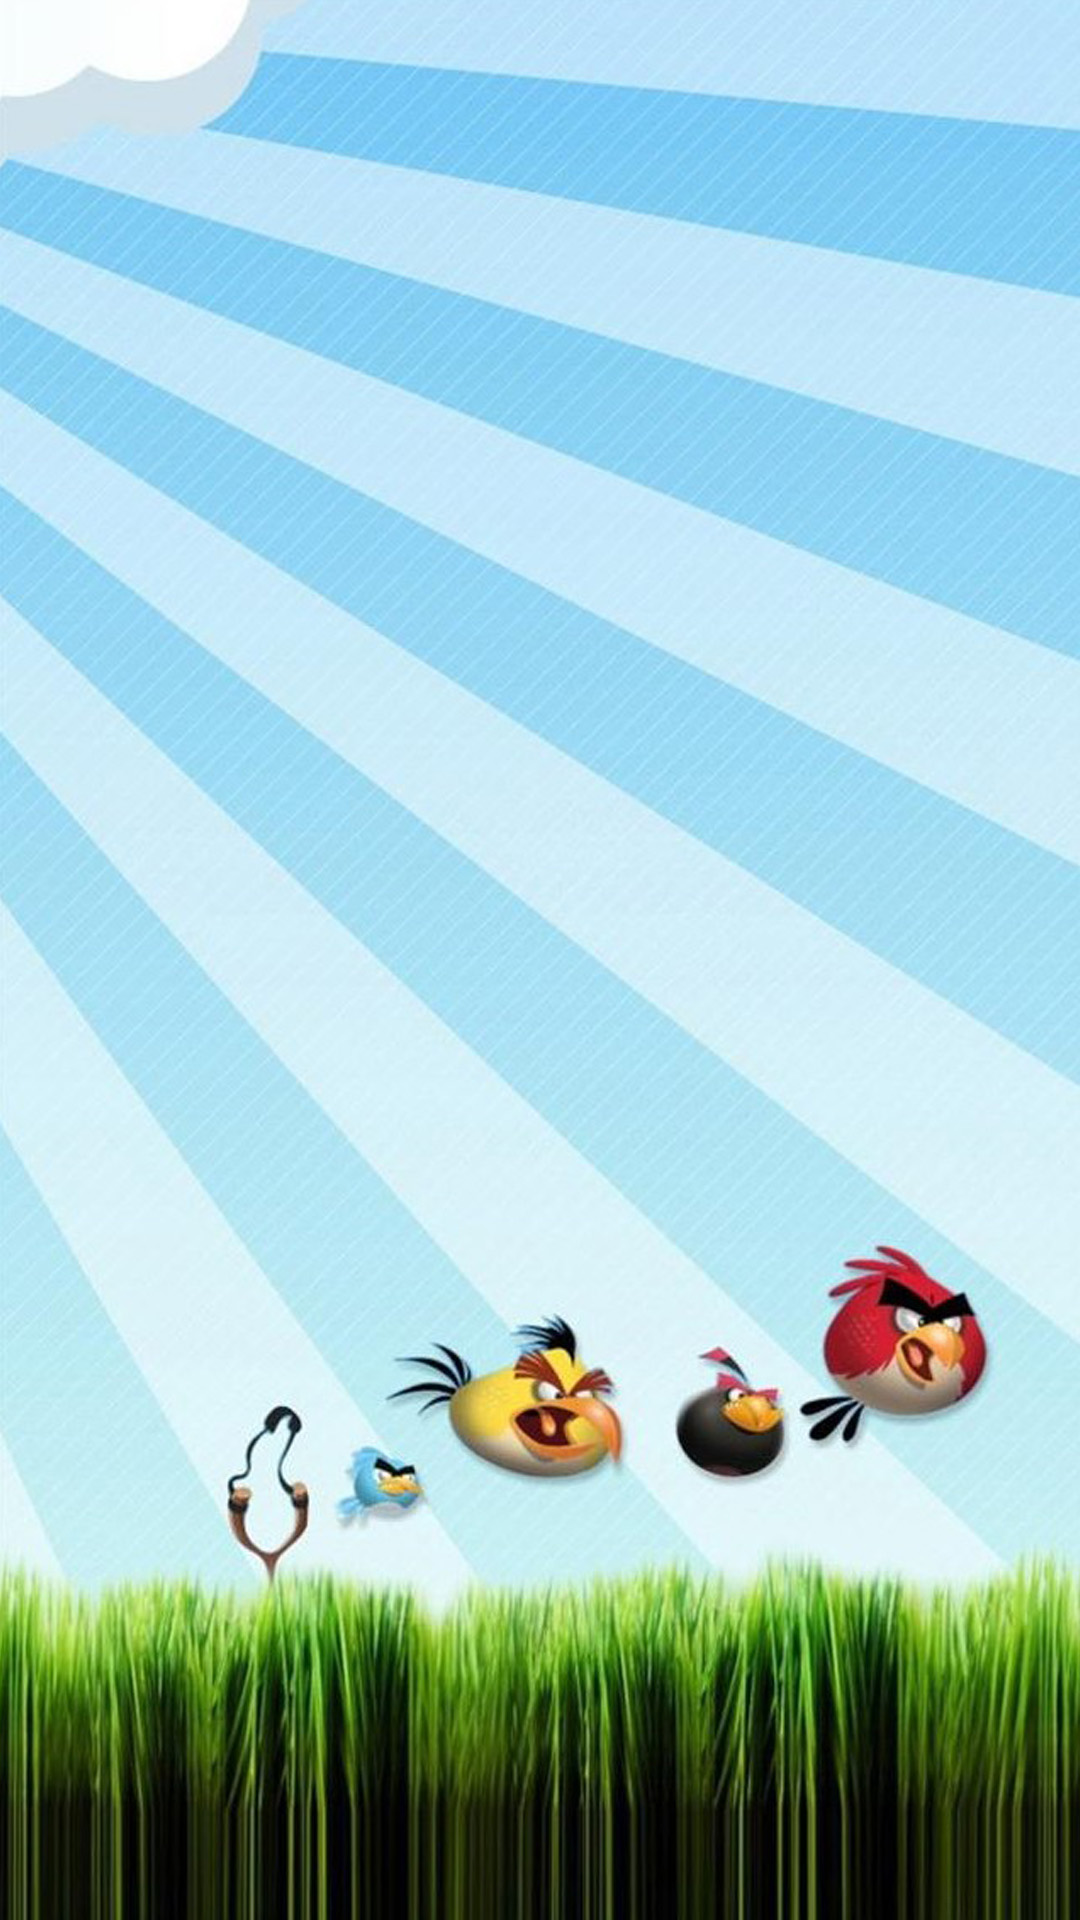 Angry Birds 3D Grass Android wallpaper